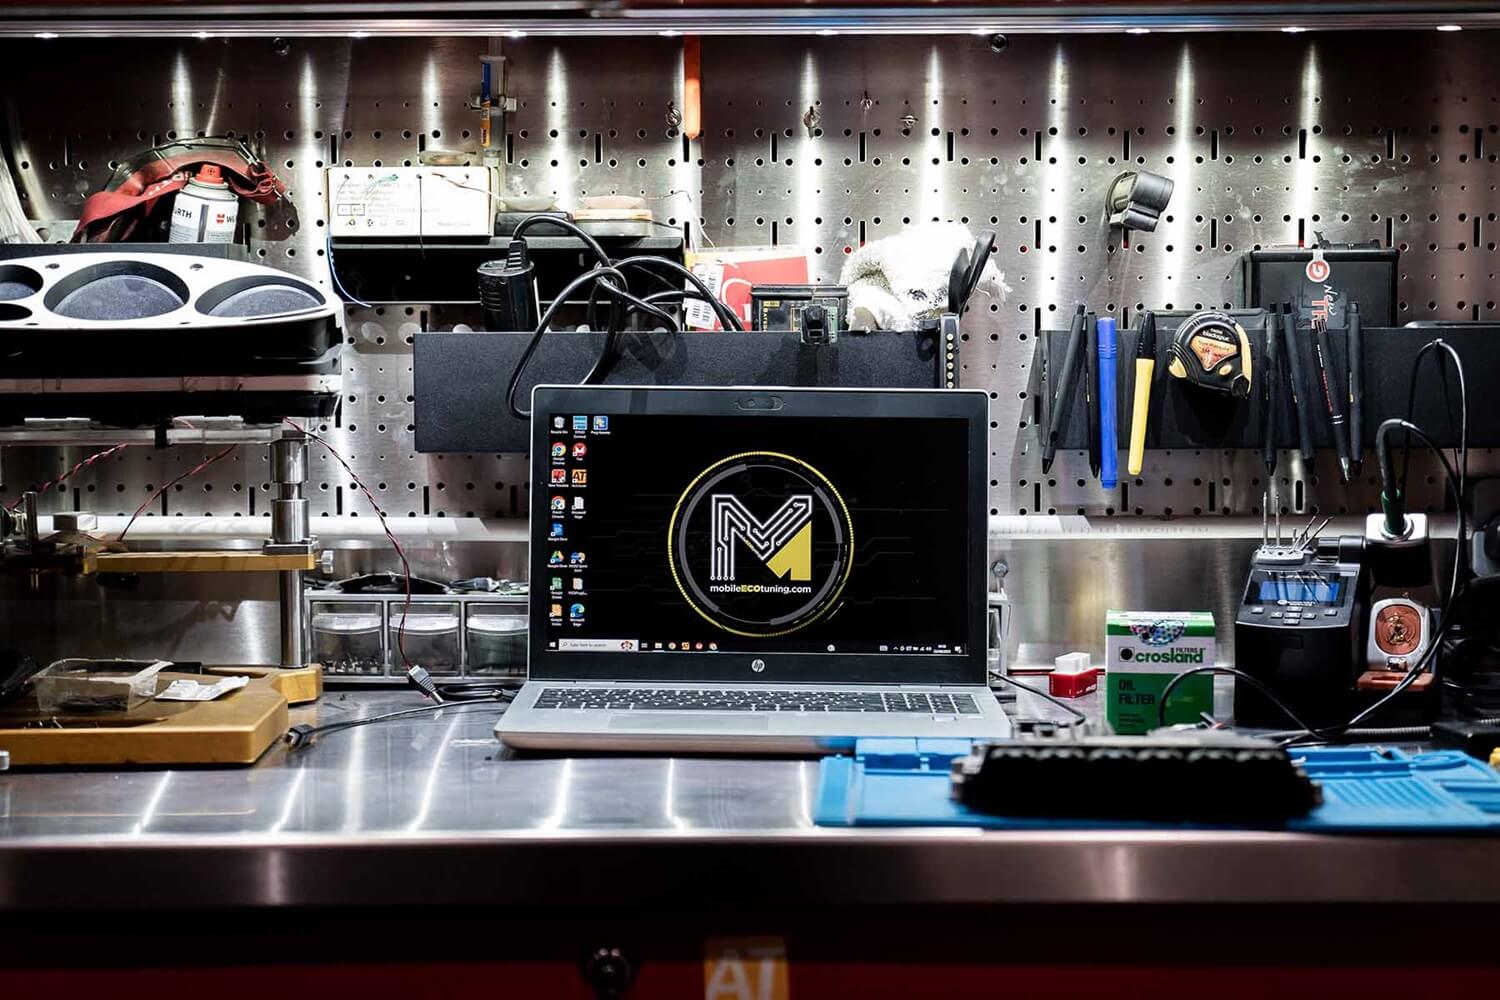 A professional automotive workstation with a laptop displaying a tuning company's MET logo on its screen. The laptop is set on a metallic workbench surrounded by various car tuning tools and equipment neatly arranged on a pegboard in the background, indicating a setting for vehicle ECU mapping services.